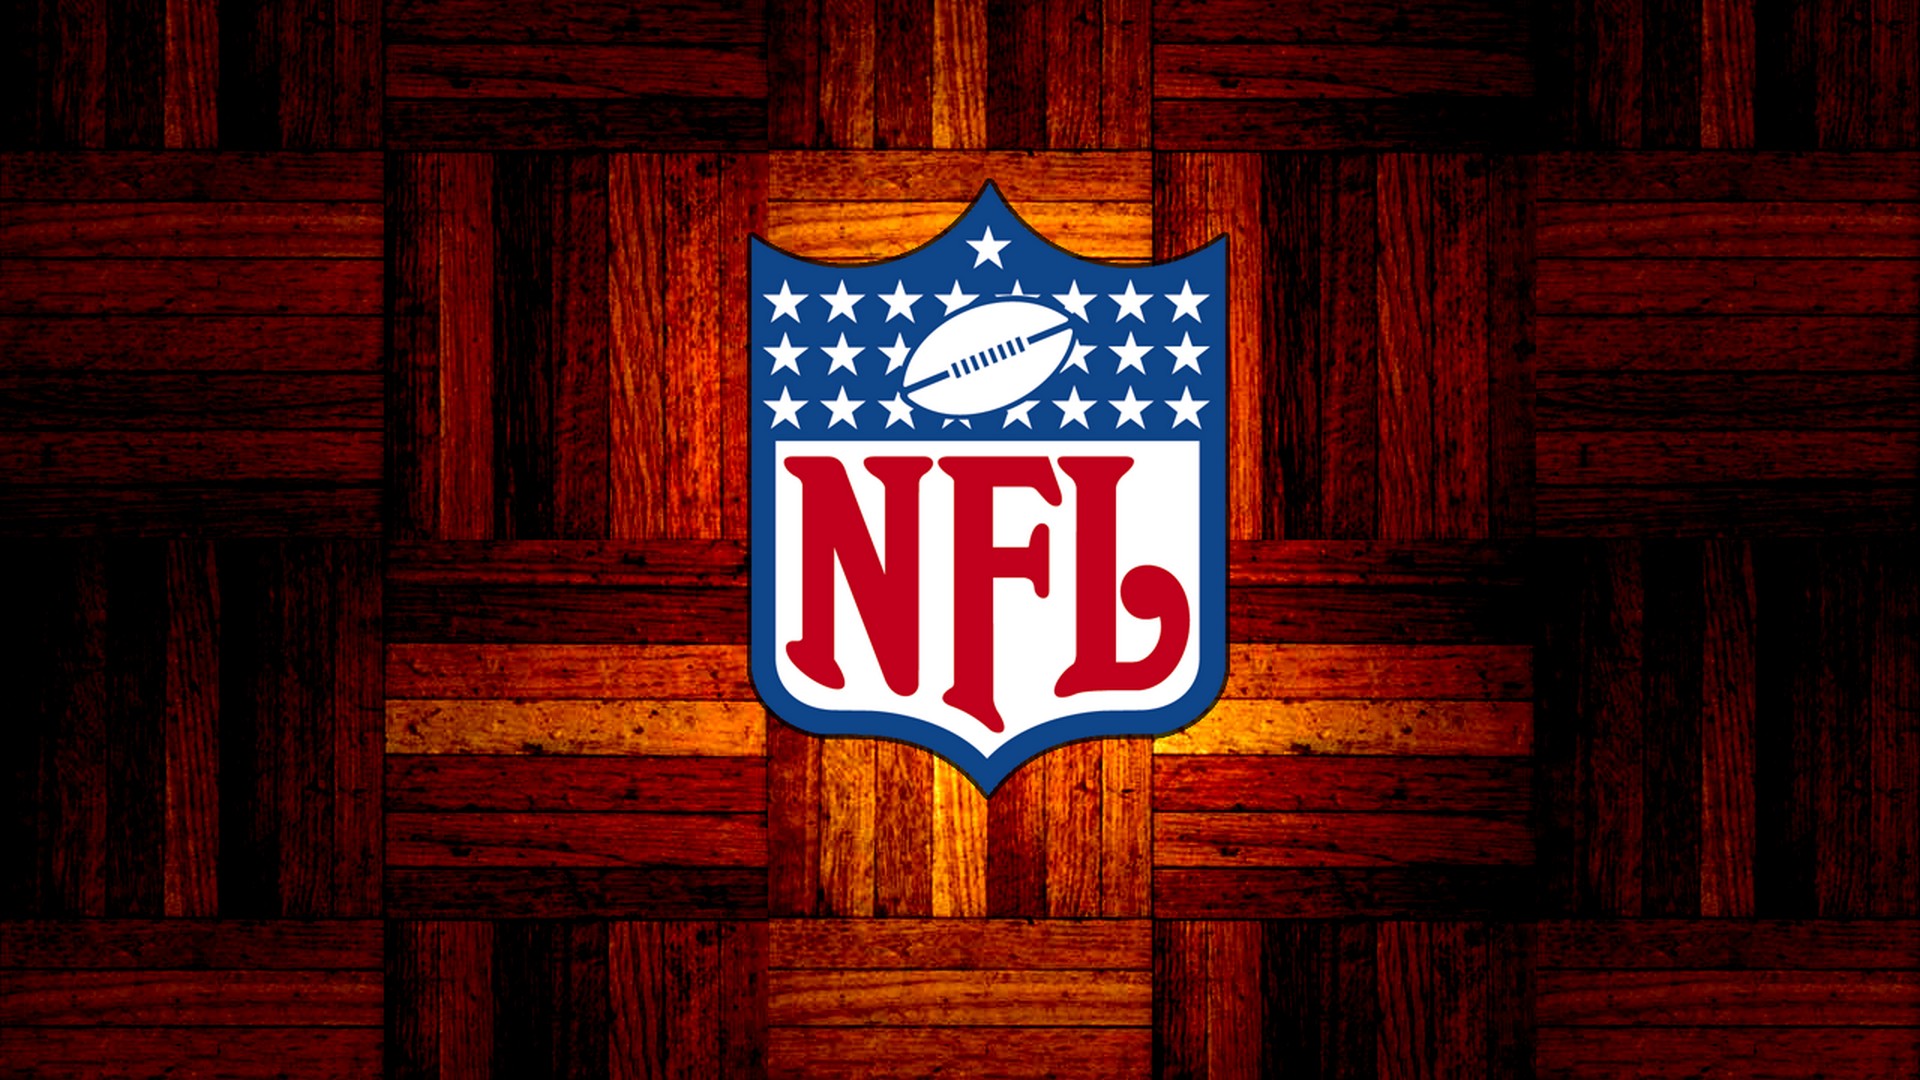 HD Cool NFL Wallpapers 1920x1080